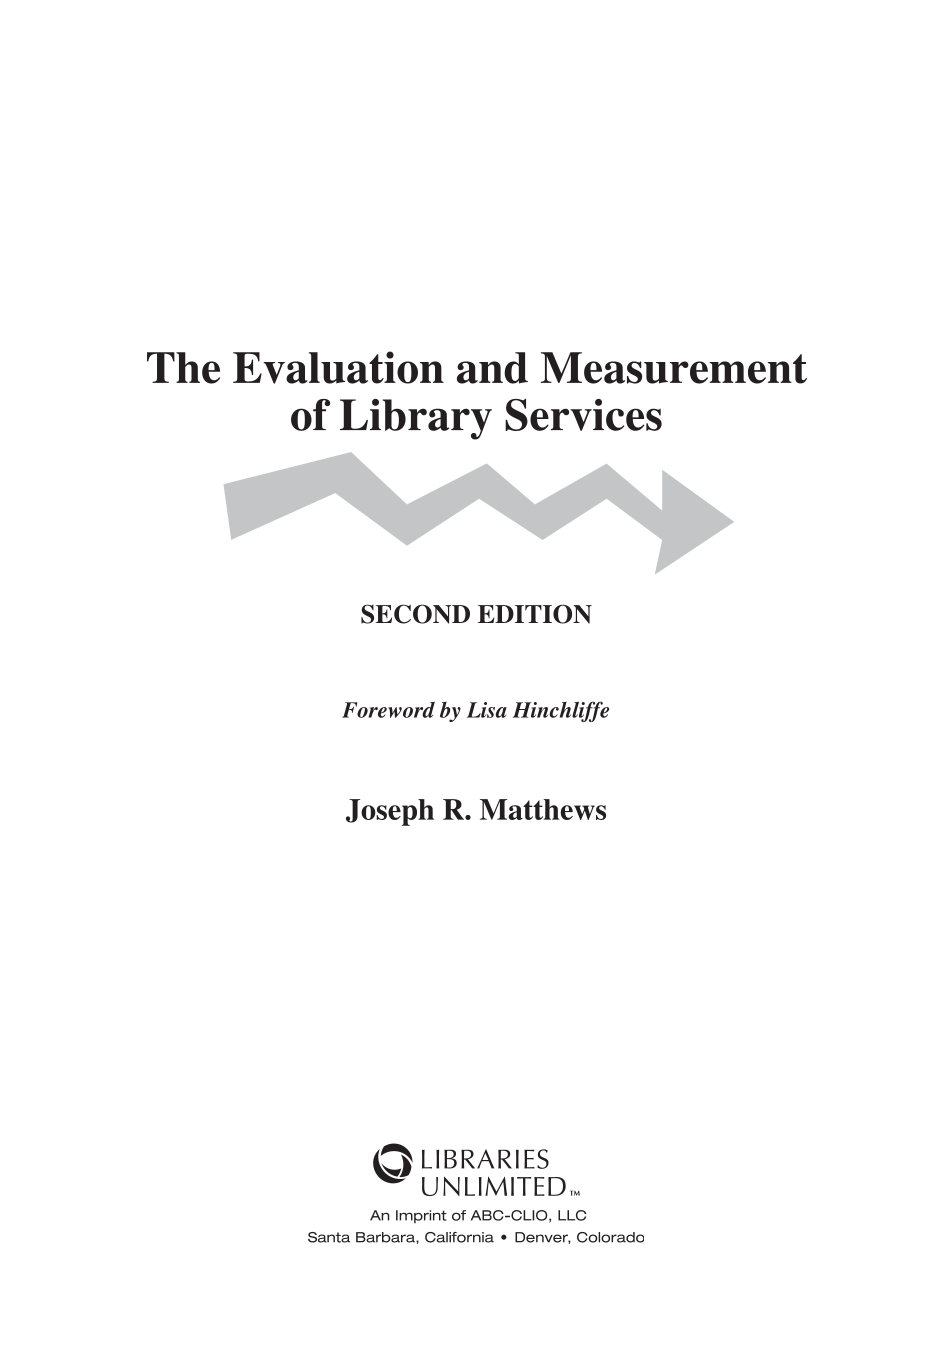 The Evaluation and Measurement of Library Services, 2nd Edition page iii